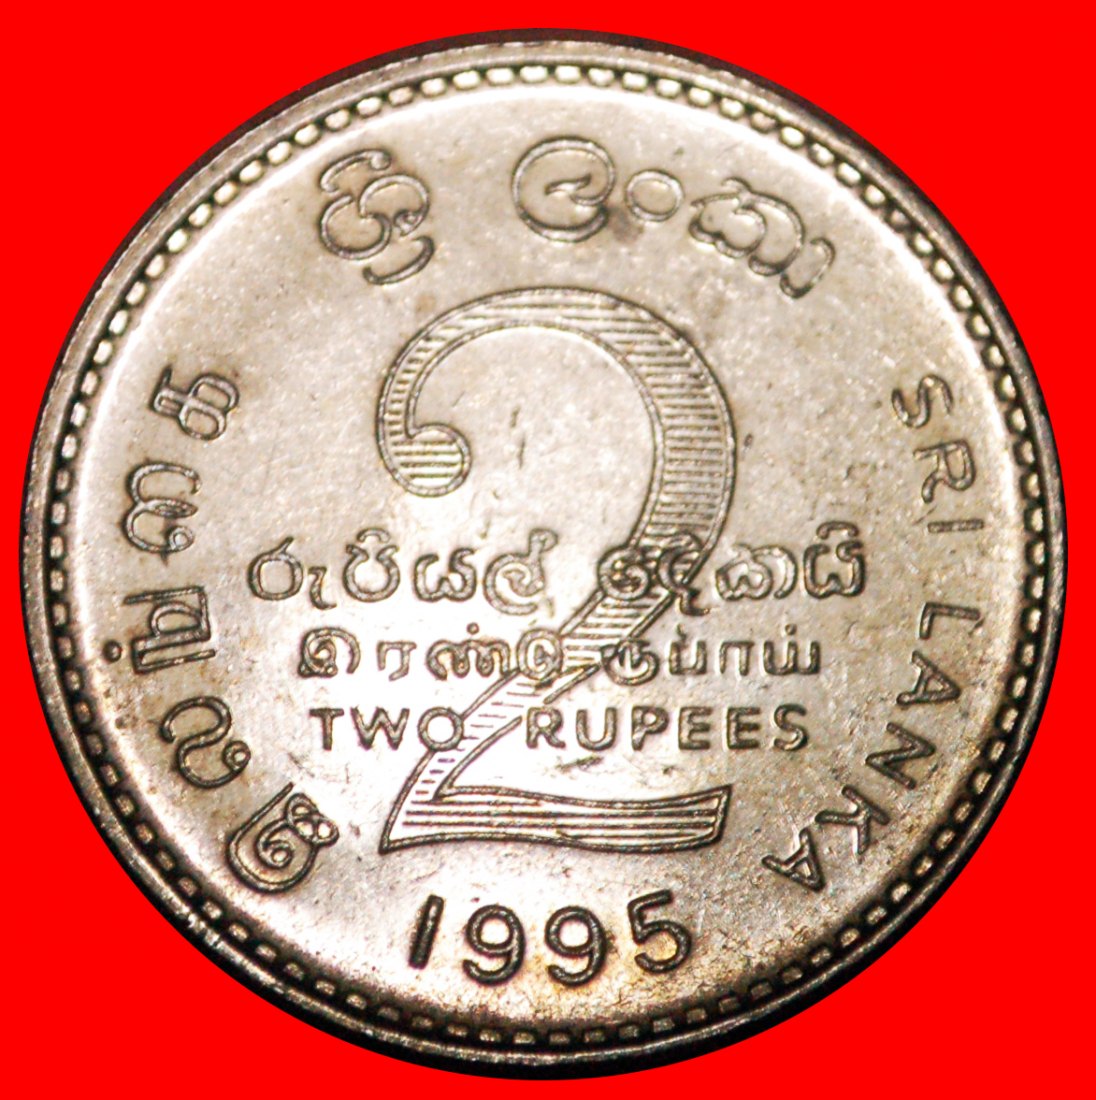  * GREAT BRITAIN FAO 1945: SRI LANKA ★ 2 RUPEES 1995 DIE A! MINT LUSTRE! ★LOW START★NO RESERVE!   